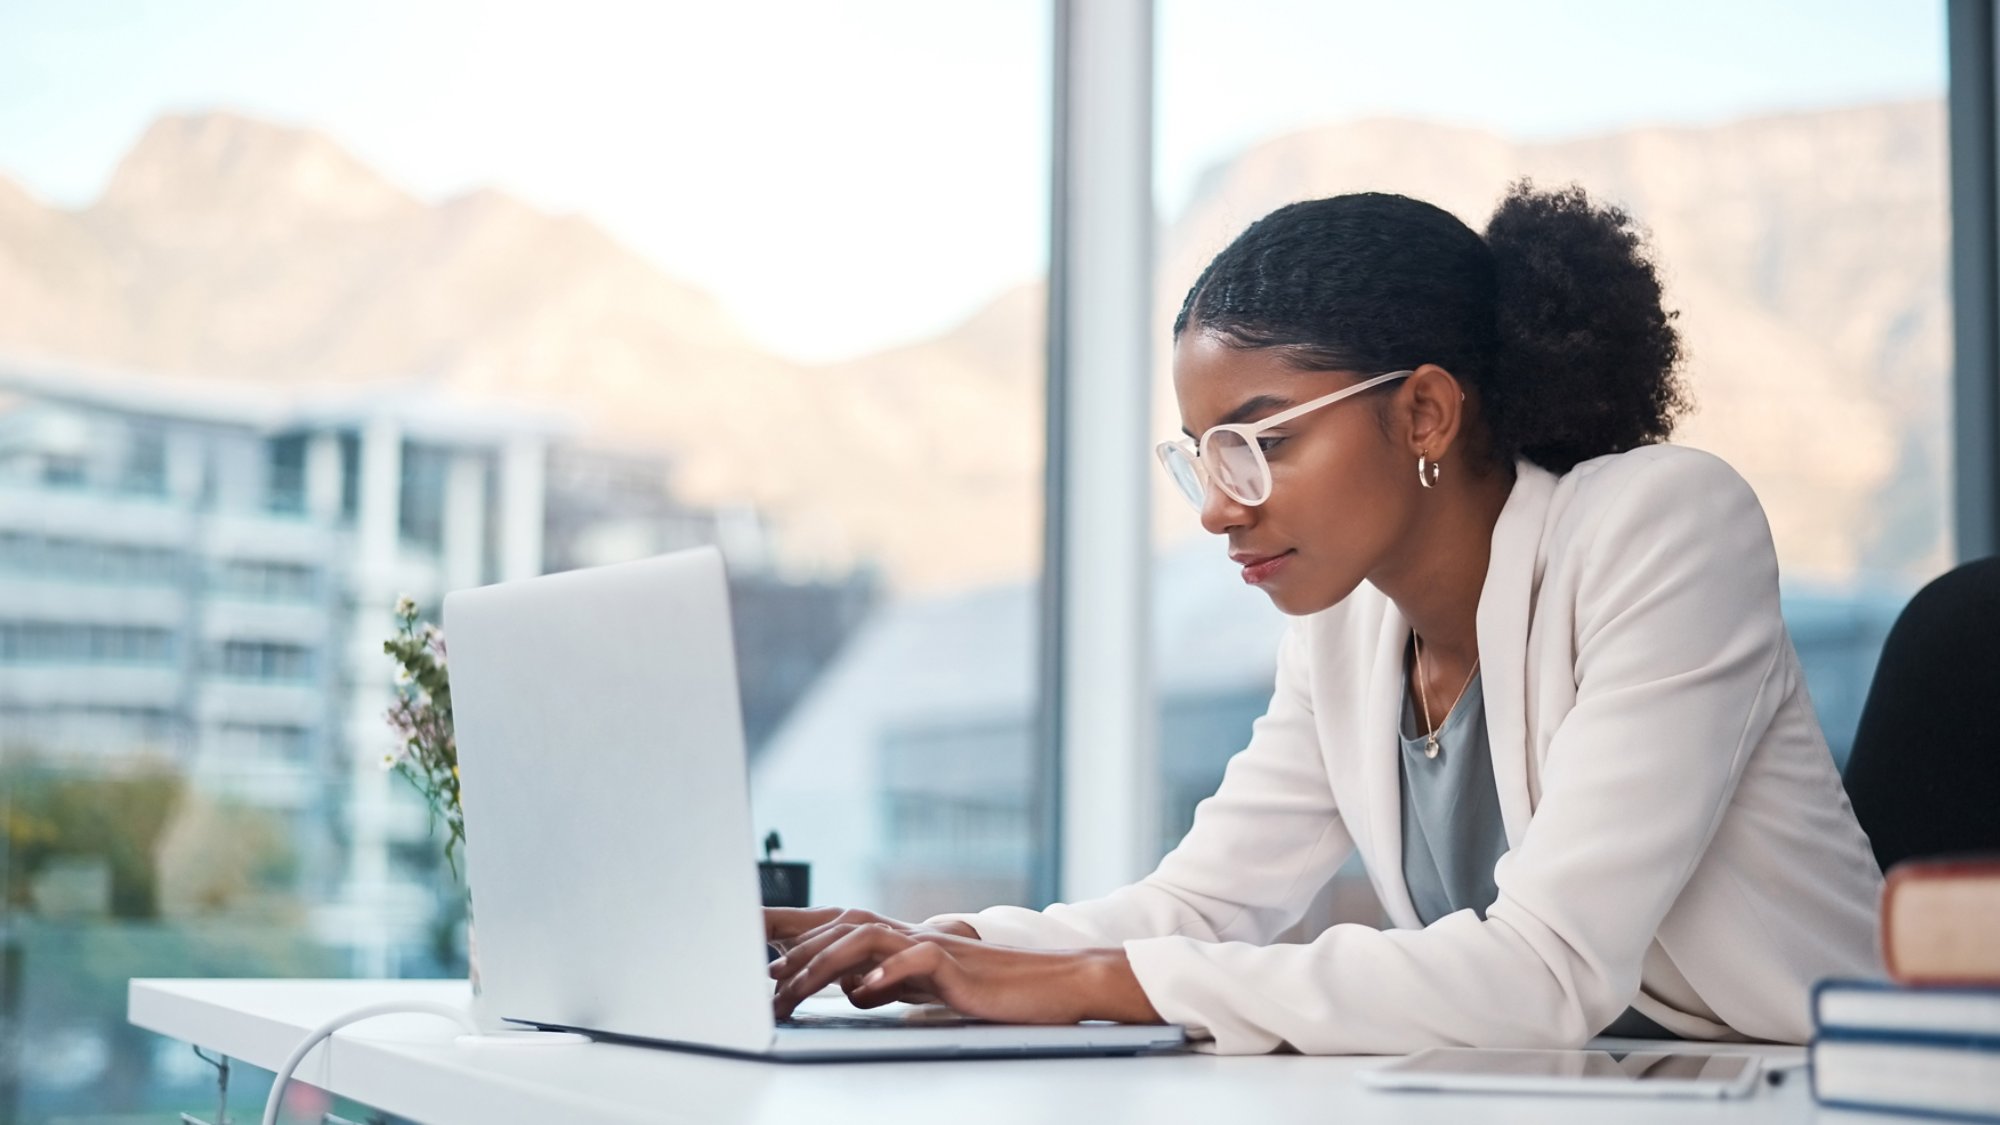 Data professional and secretary typing an email on a laptop and doing online research while working in an office. African entrepreneur looking focused while using the internet for work.